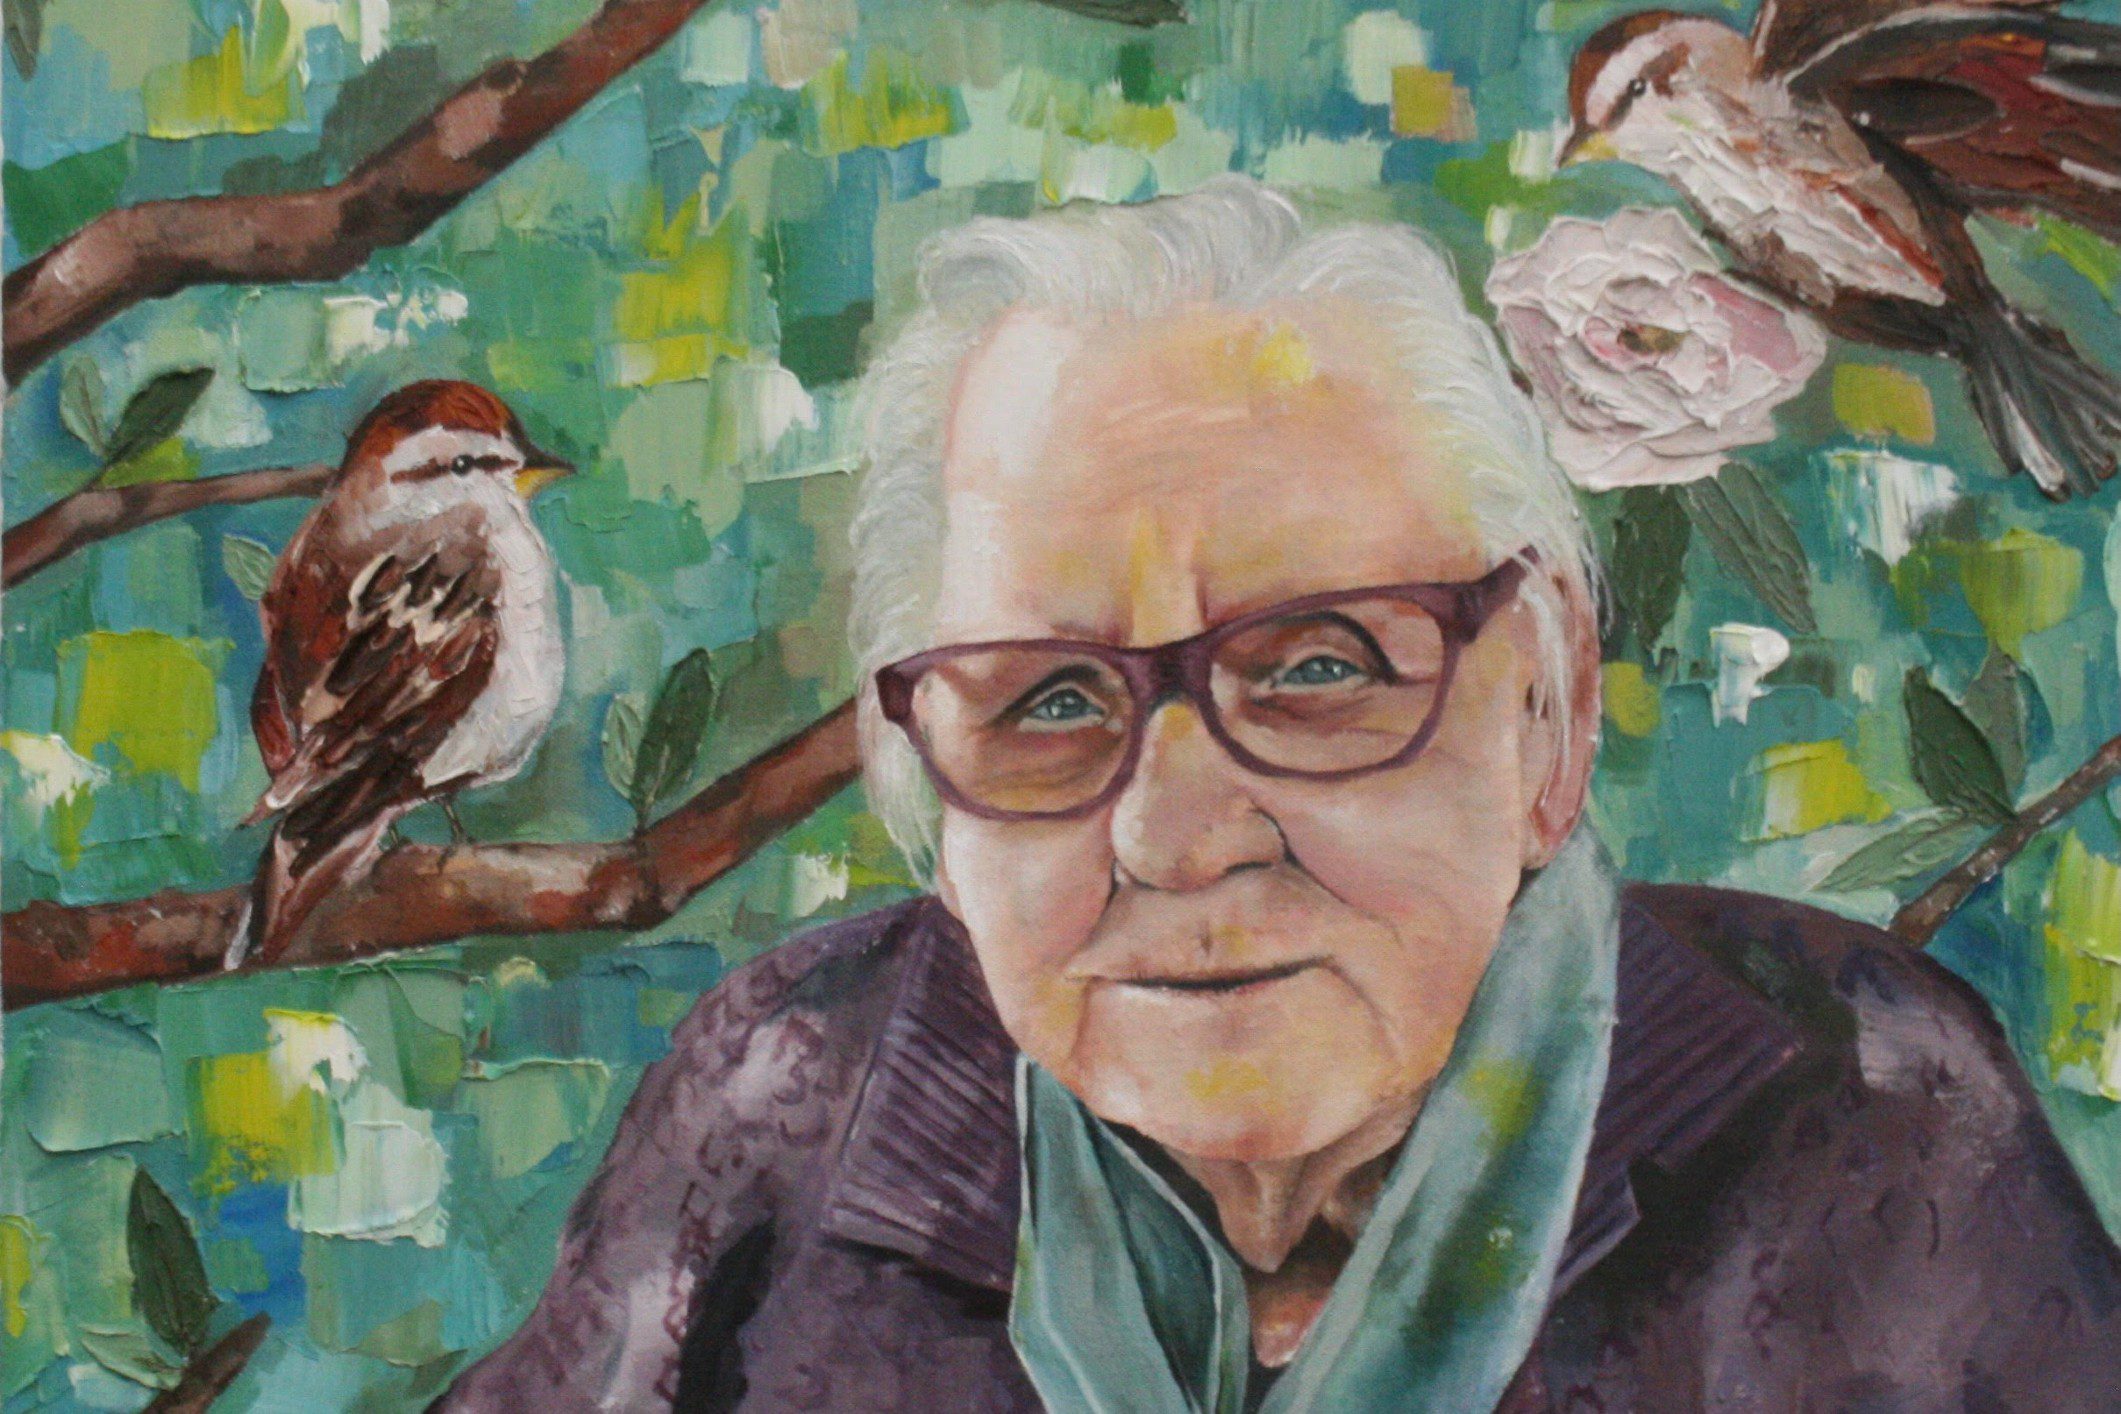 “Their personalities never change”: Teenage artists take on centenarian portraits